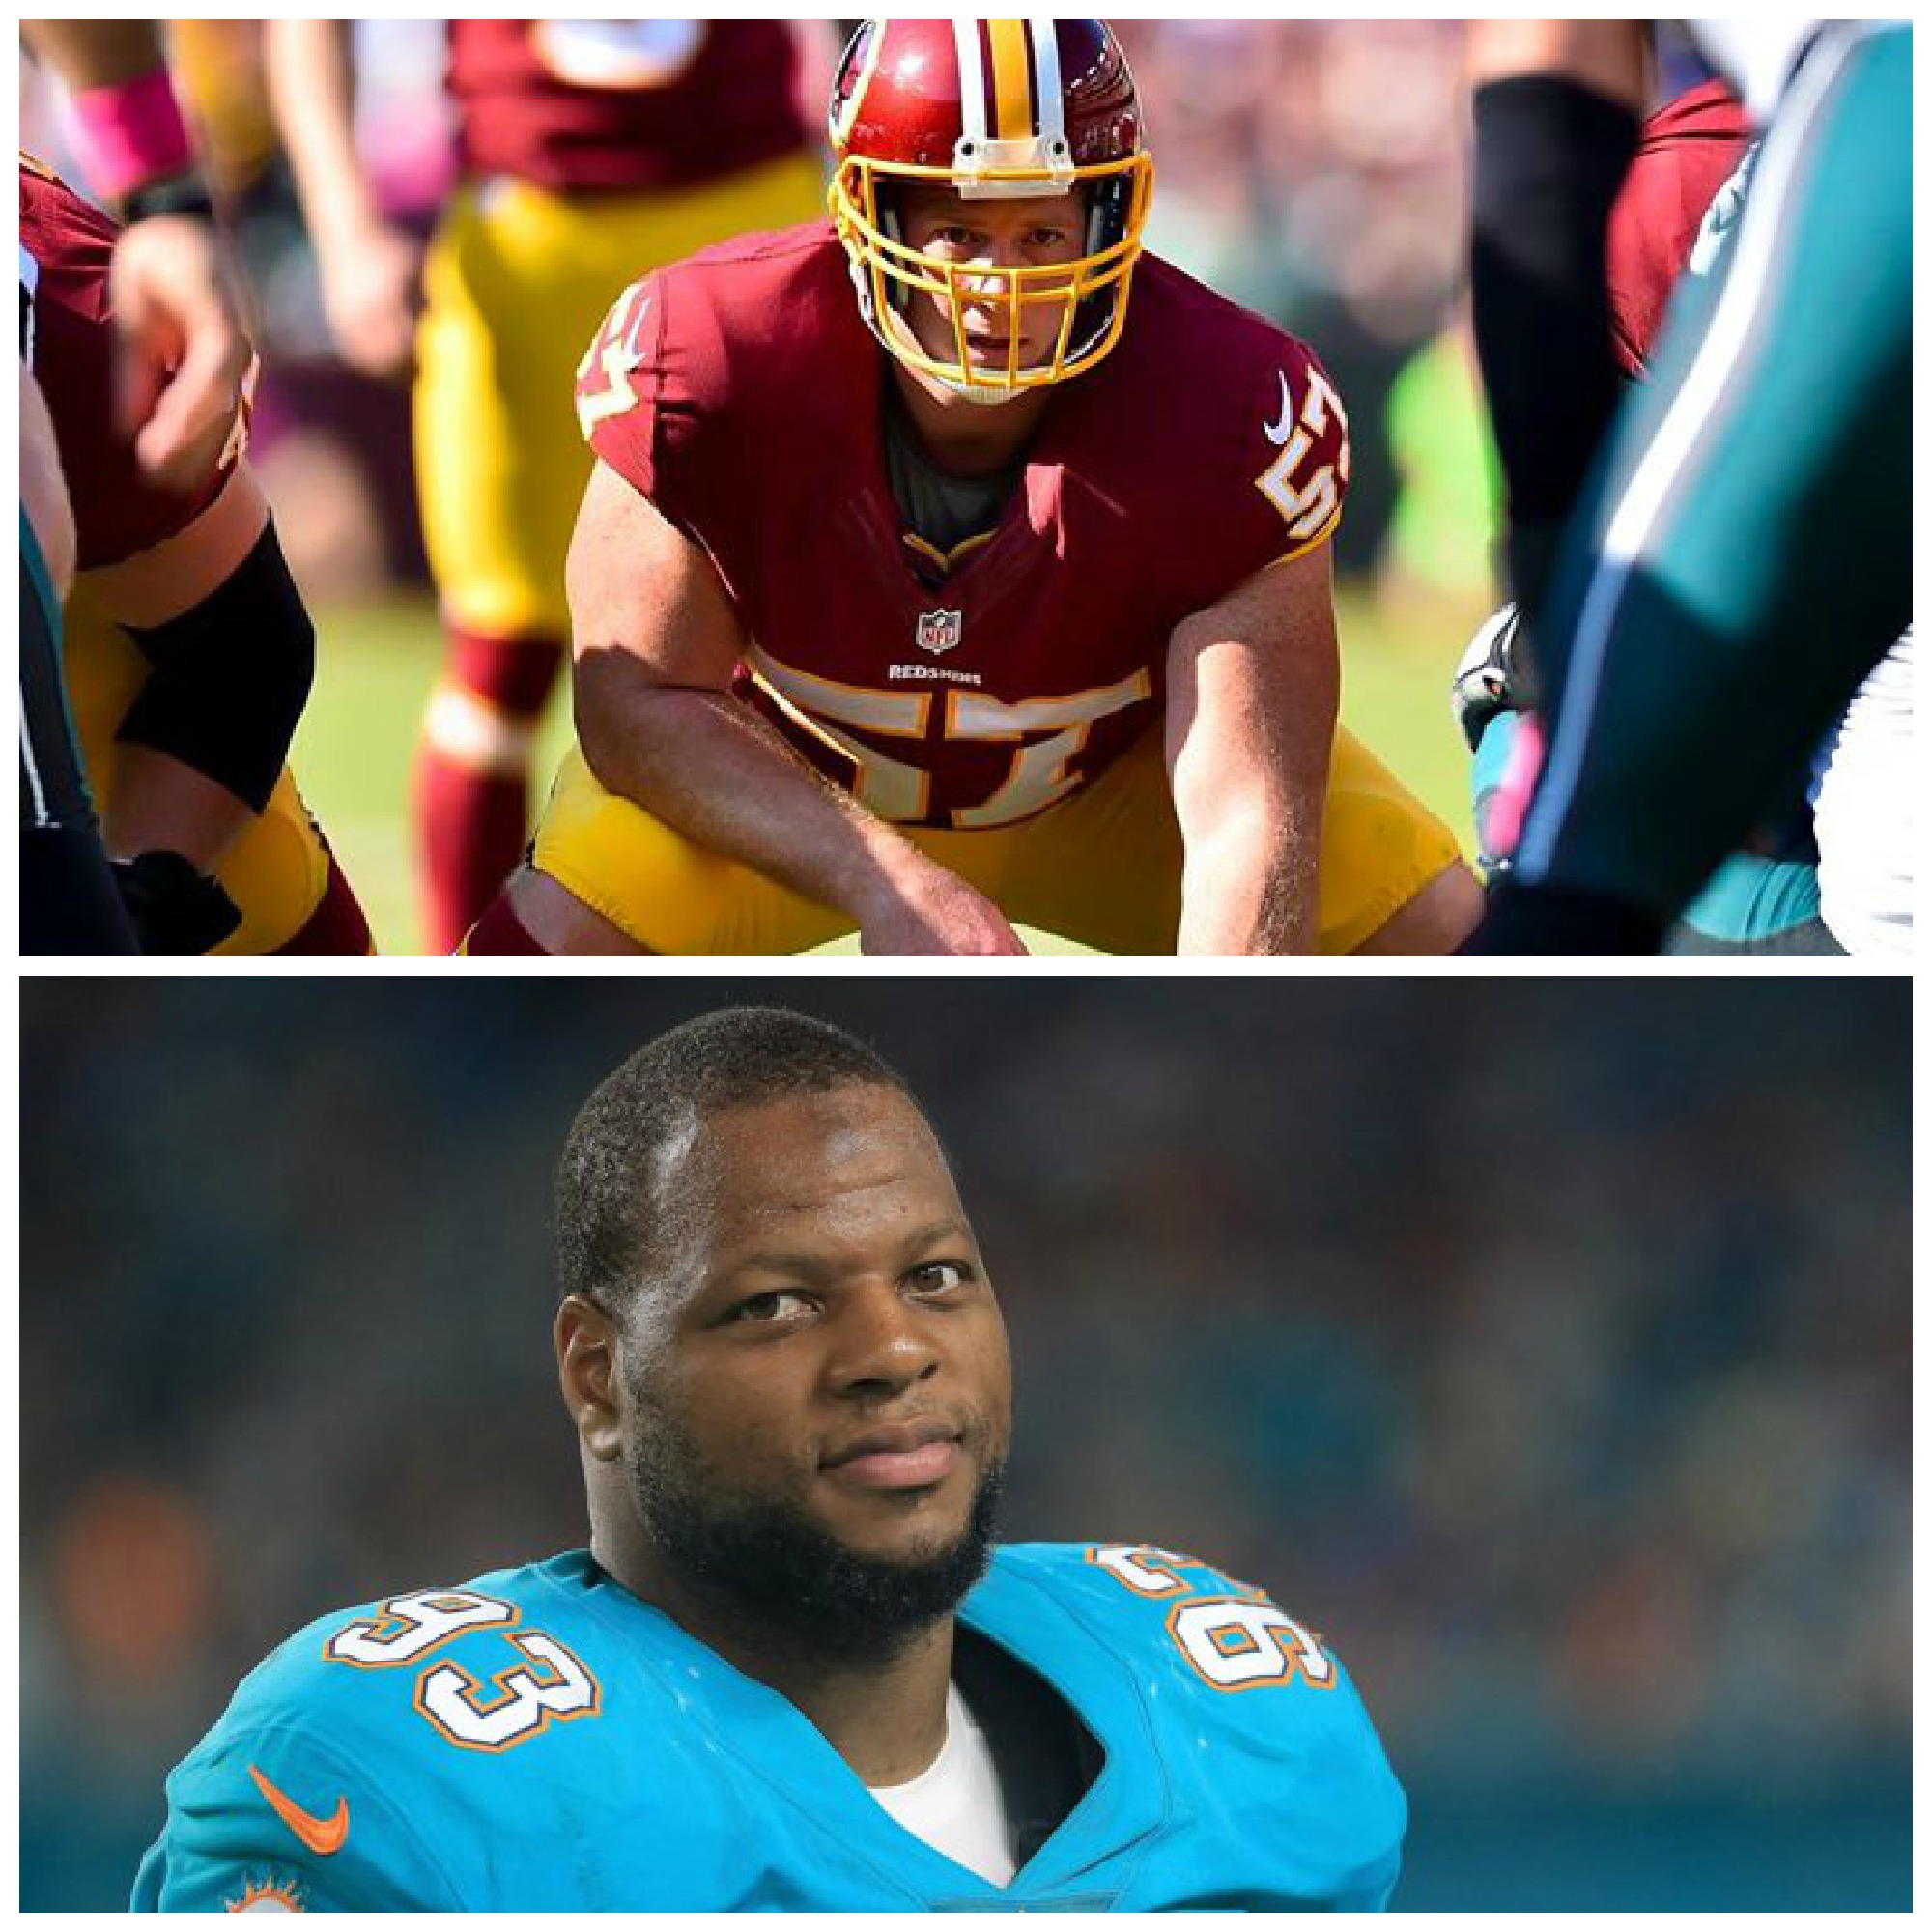 In this Week's Thursday Night Tailgate Spotlight on the Positive hear about the great this Nick Sundberg & Ndamukong Suh are doing in their communities.